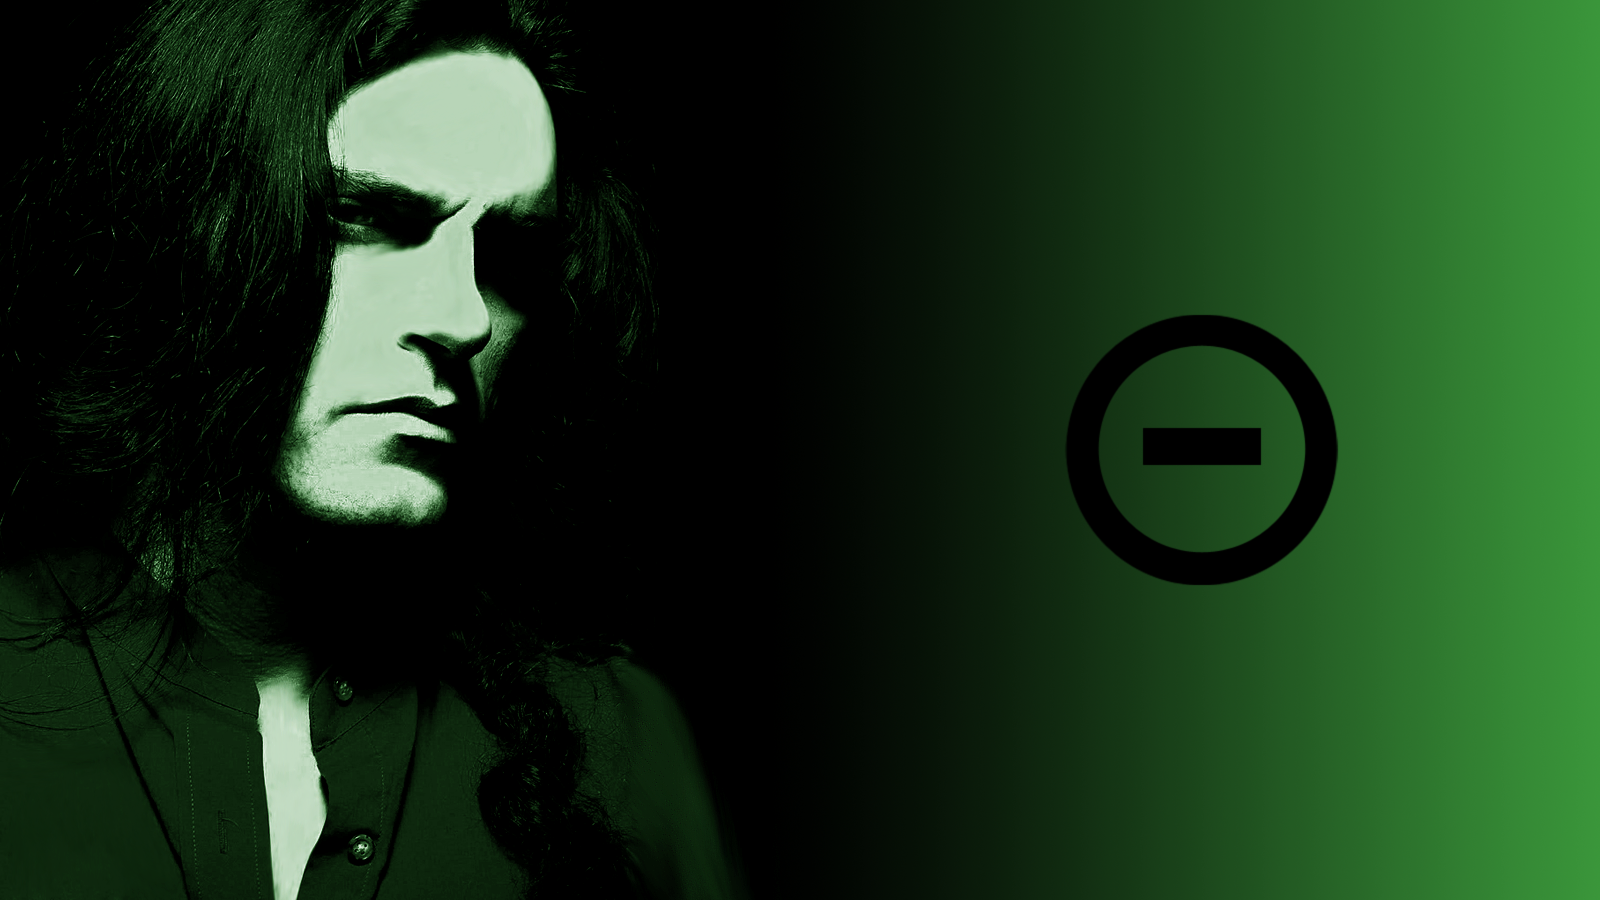 Pin by Kevin on TYPE O NEGATIVE  Type o negative band Type o negative  Peter steele